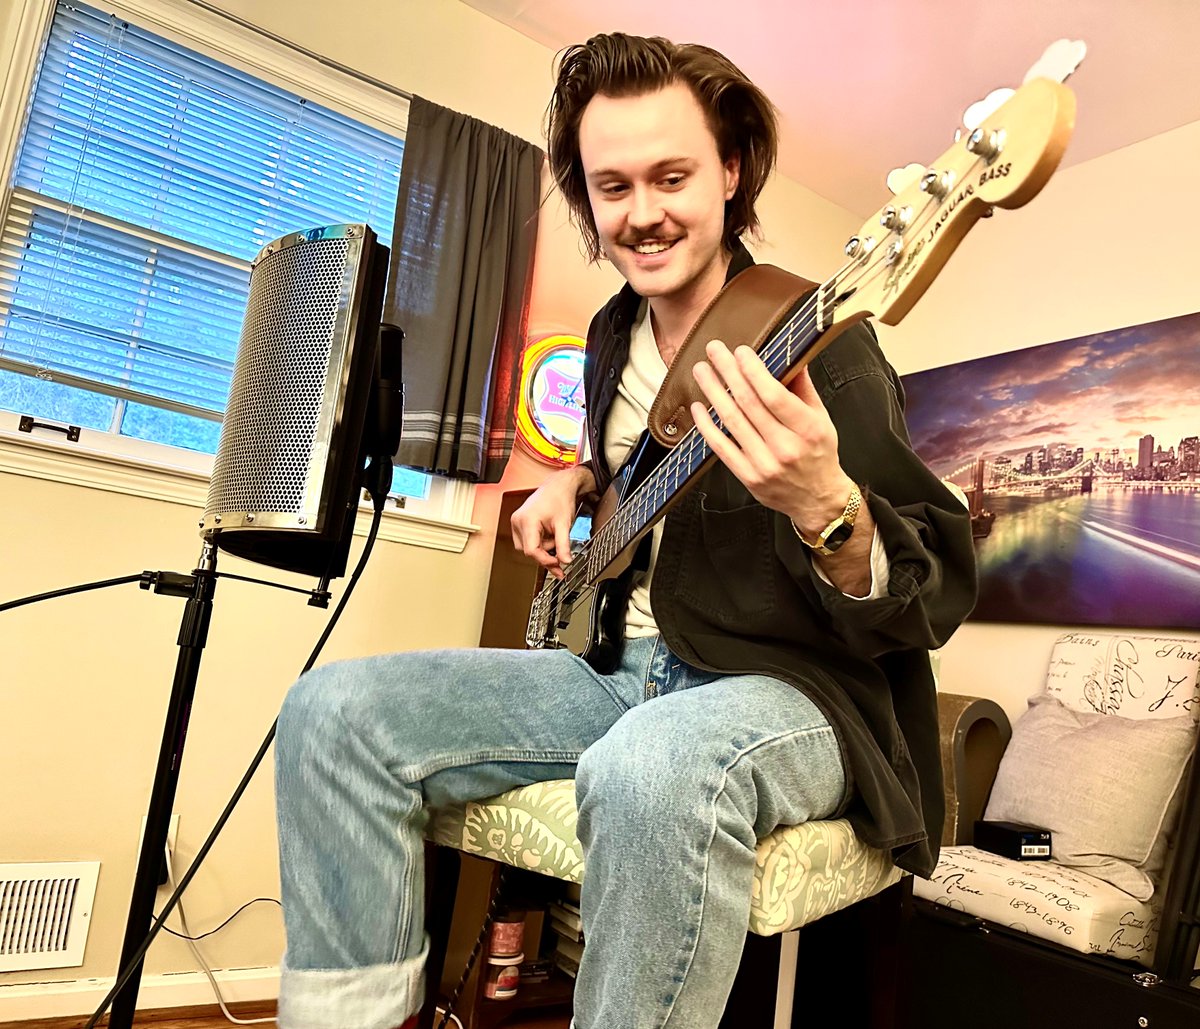 Introducing our 3rd and final #bandmember, Matt (Matthew)  

  🎤Bass and backup vocals  
 🎸Self taught bassist of 6 years  
🎹Has previously played the saxophone and piano 
 🧔Has the best mustache in the band 😛
 
#indierockband #indierock #newband #band #couchcultband